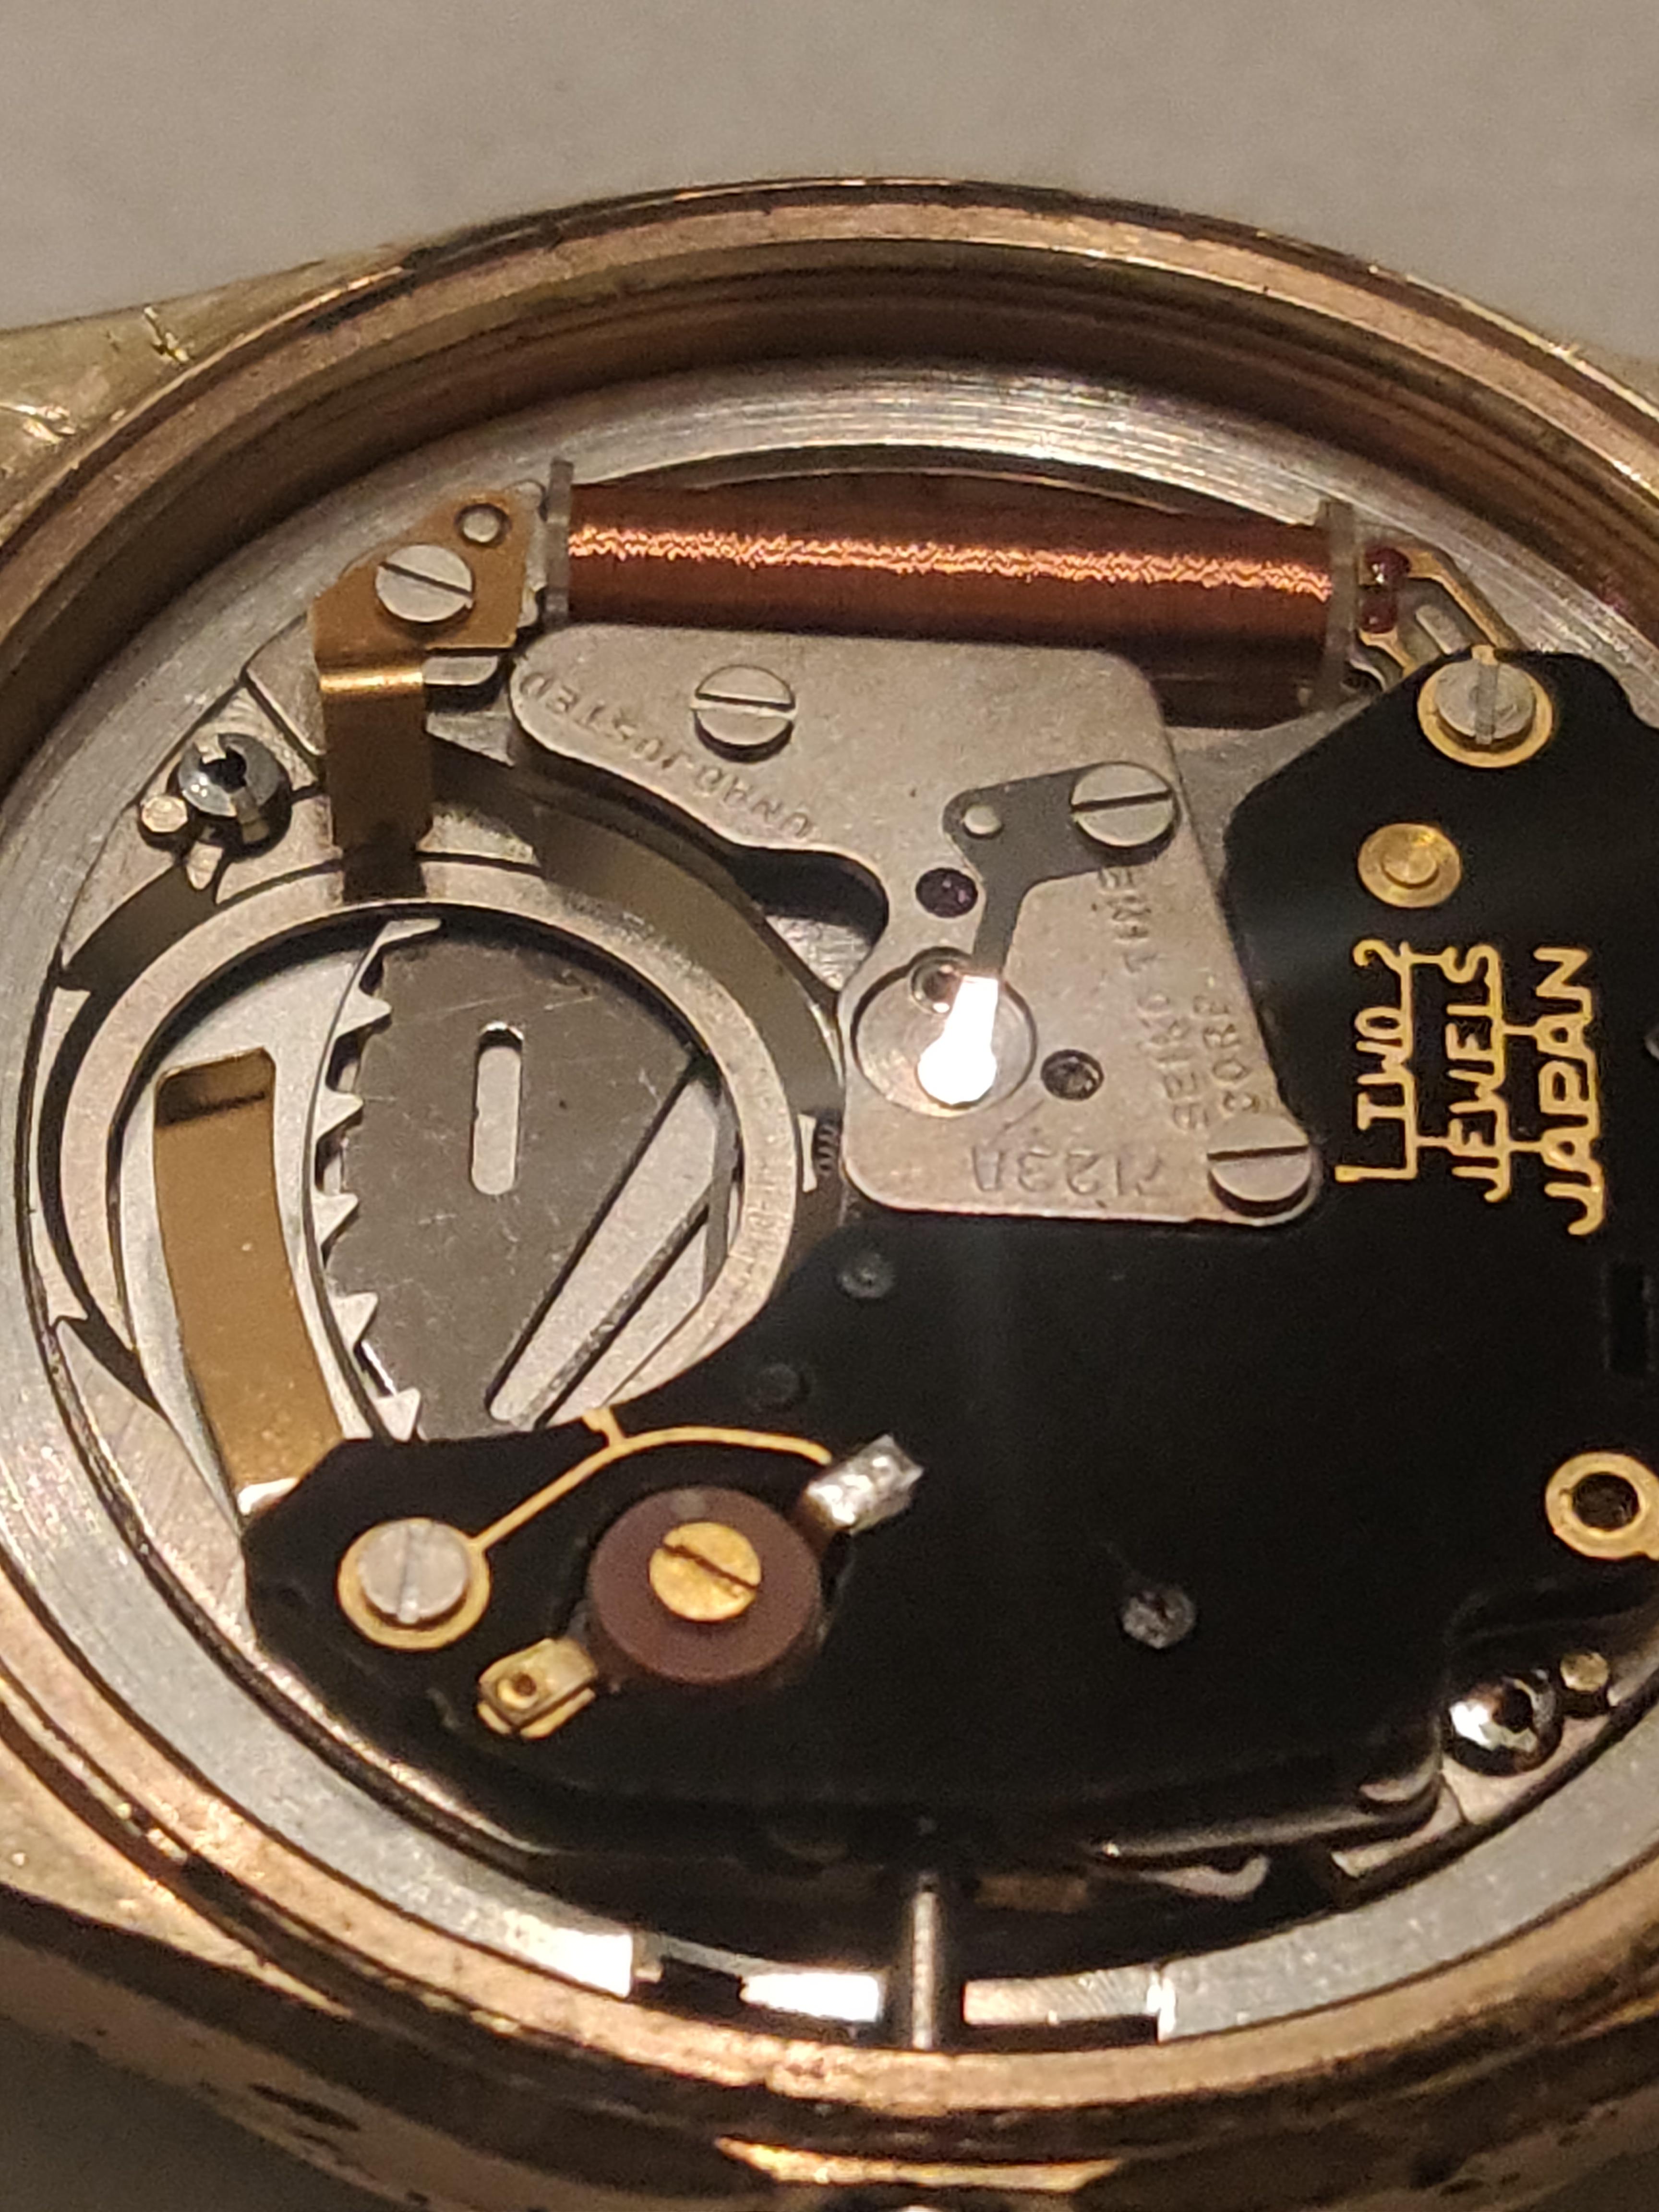 7123A Seiko stem removal - Watch Case Issues, Opening, Movement/Stem Removal,  Case Parts, straps and bracelets - Watch Repair Talk